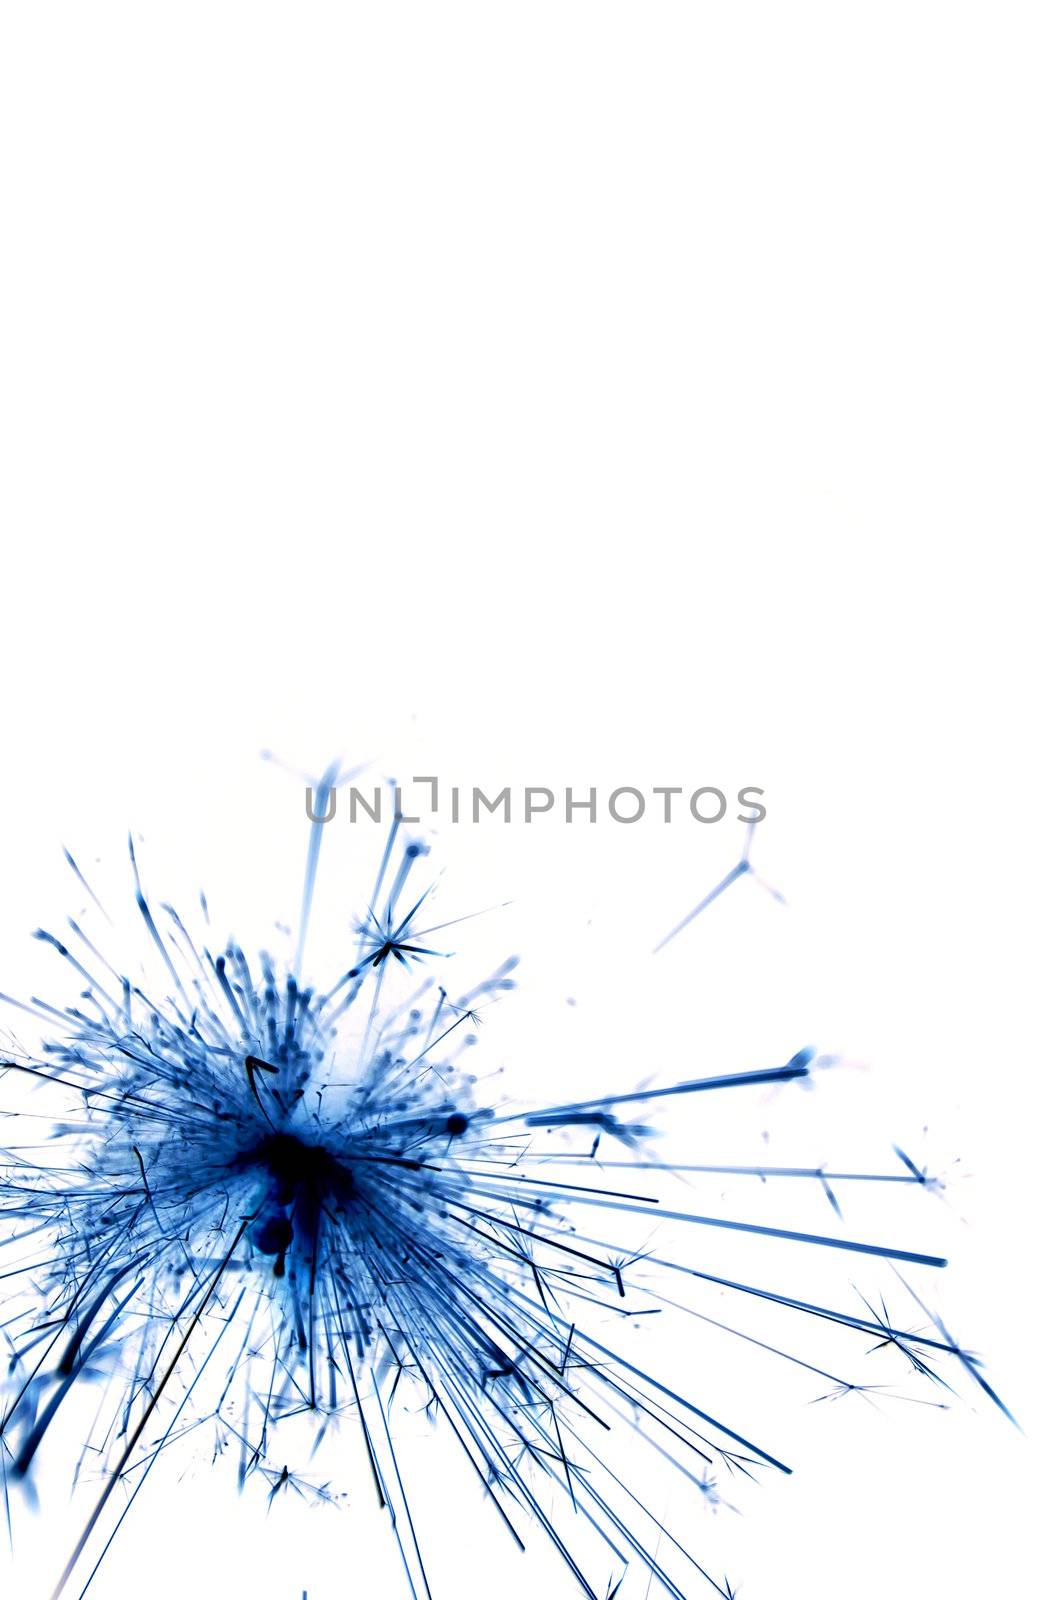 abstract holiday sparkler background with copyspace for text message